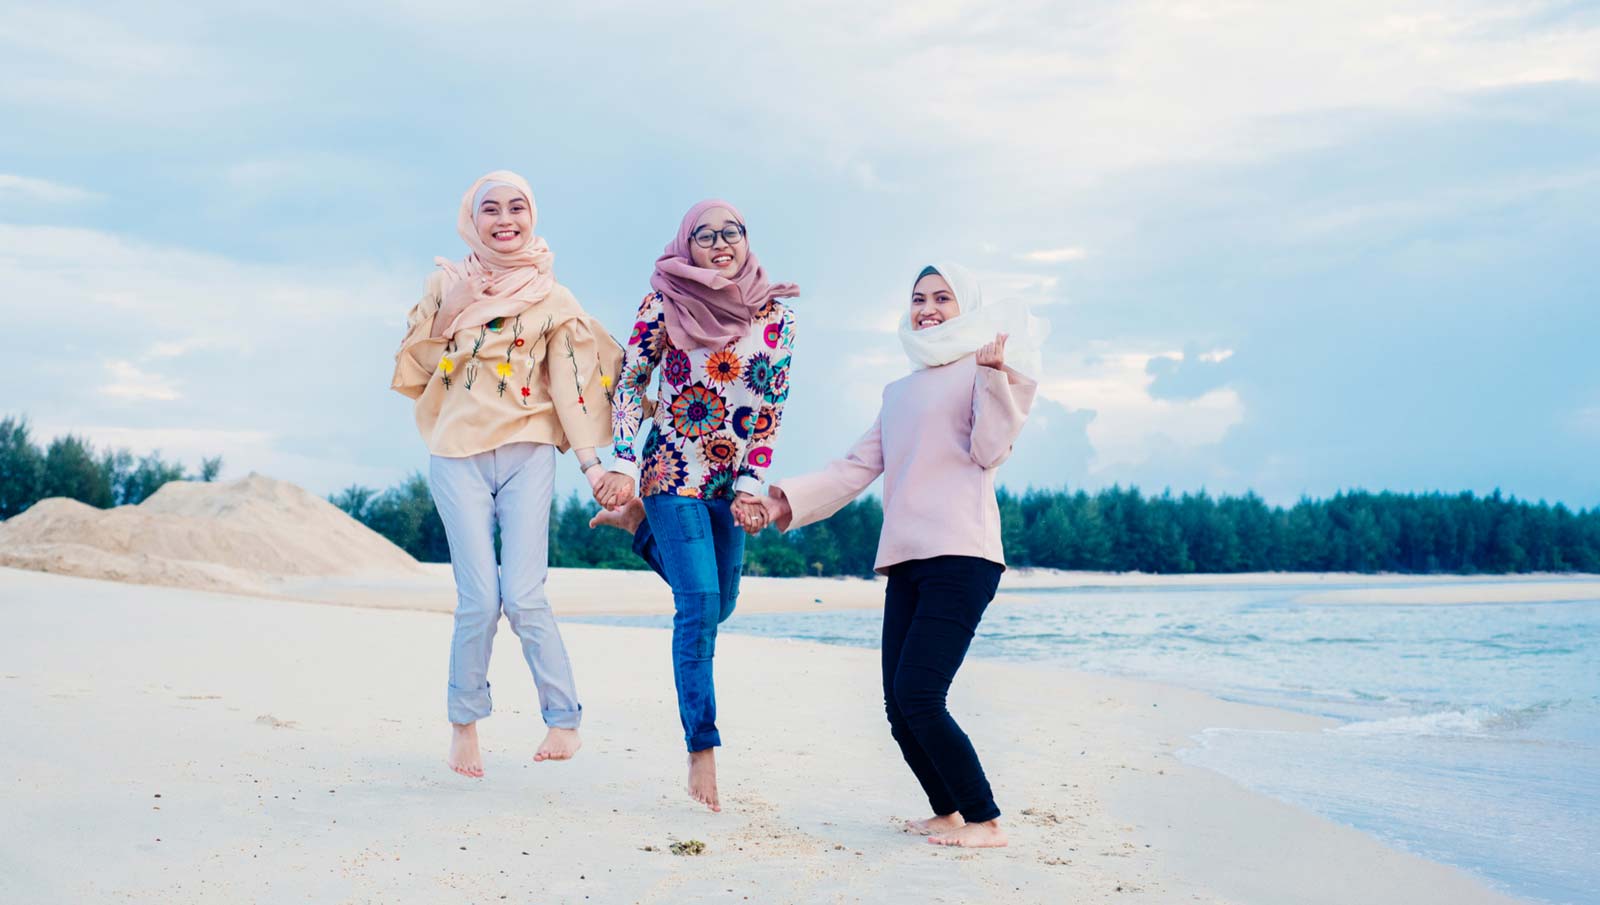 5 Life-Changing Lessons My Muslim Friends Taught Me